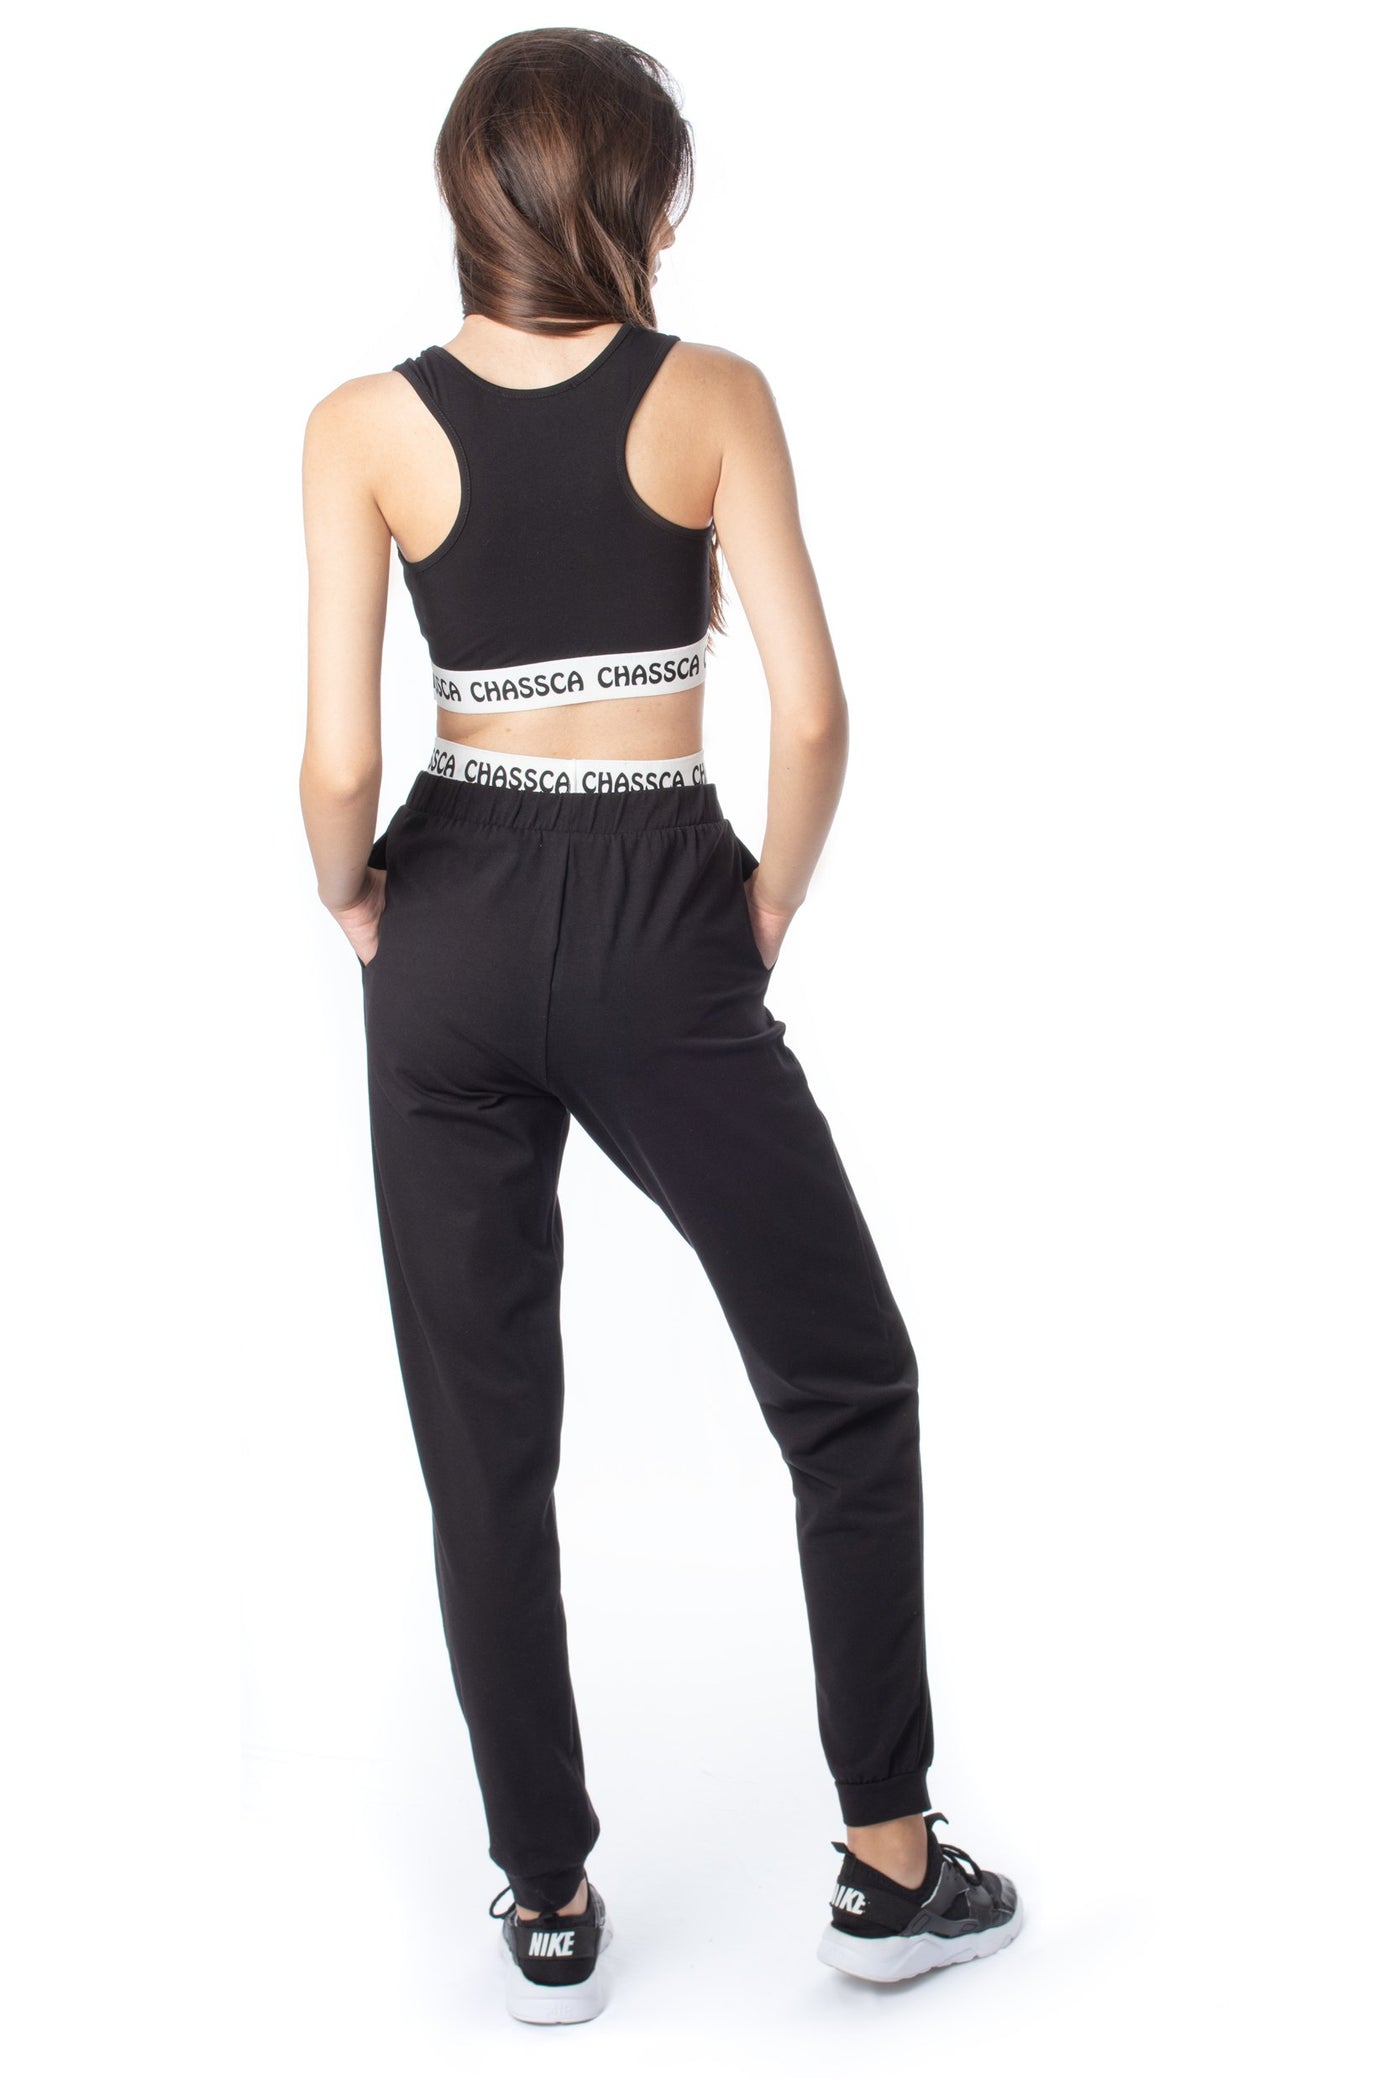 chassca cropped top & jogger pant set - Breakmood